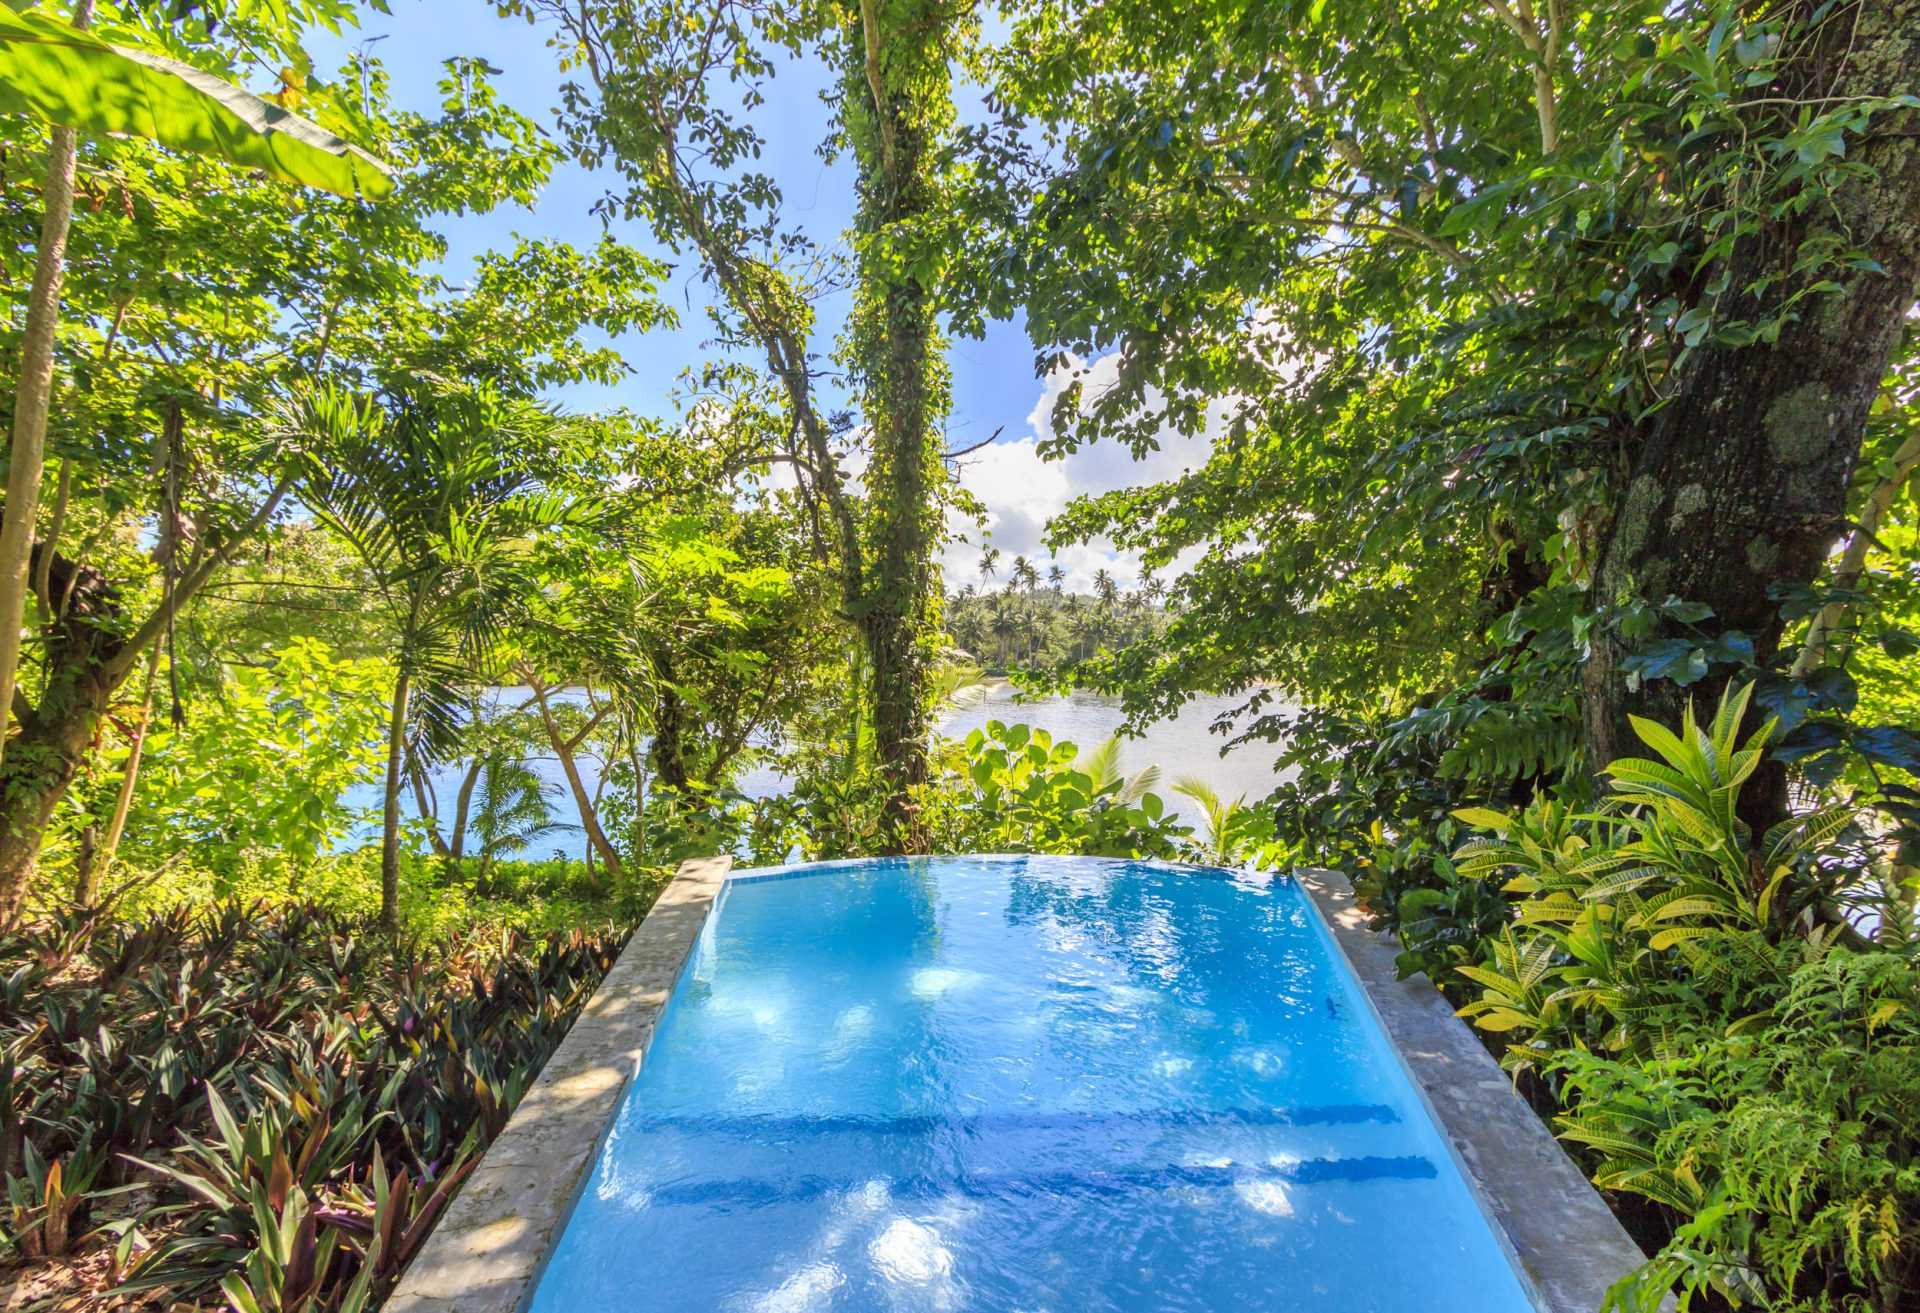 Private villa plunge pool surrounded by tropical foliage